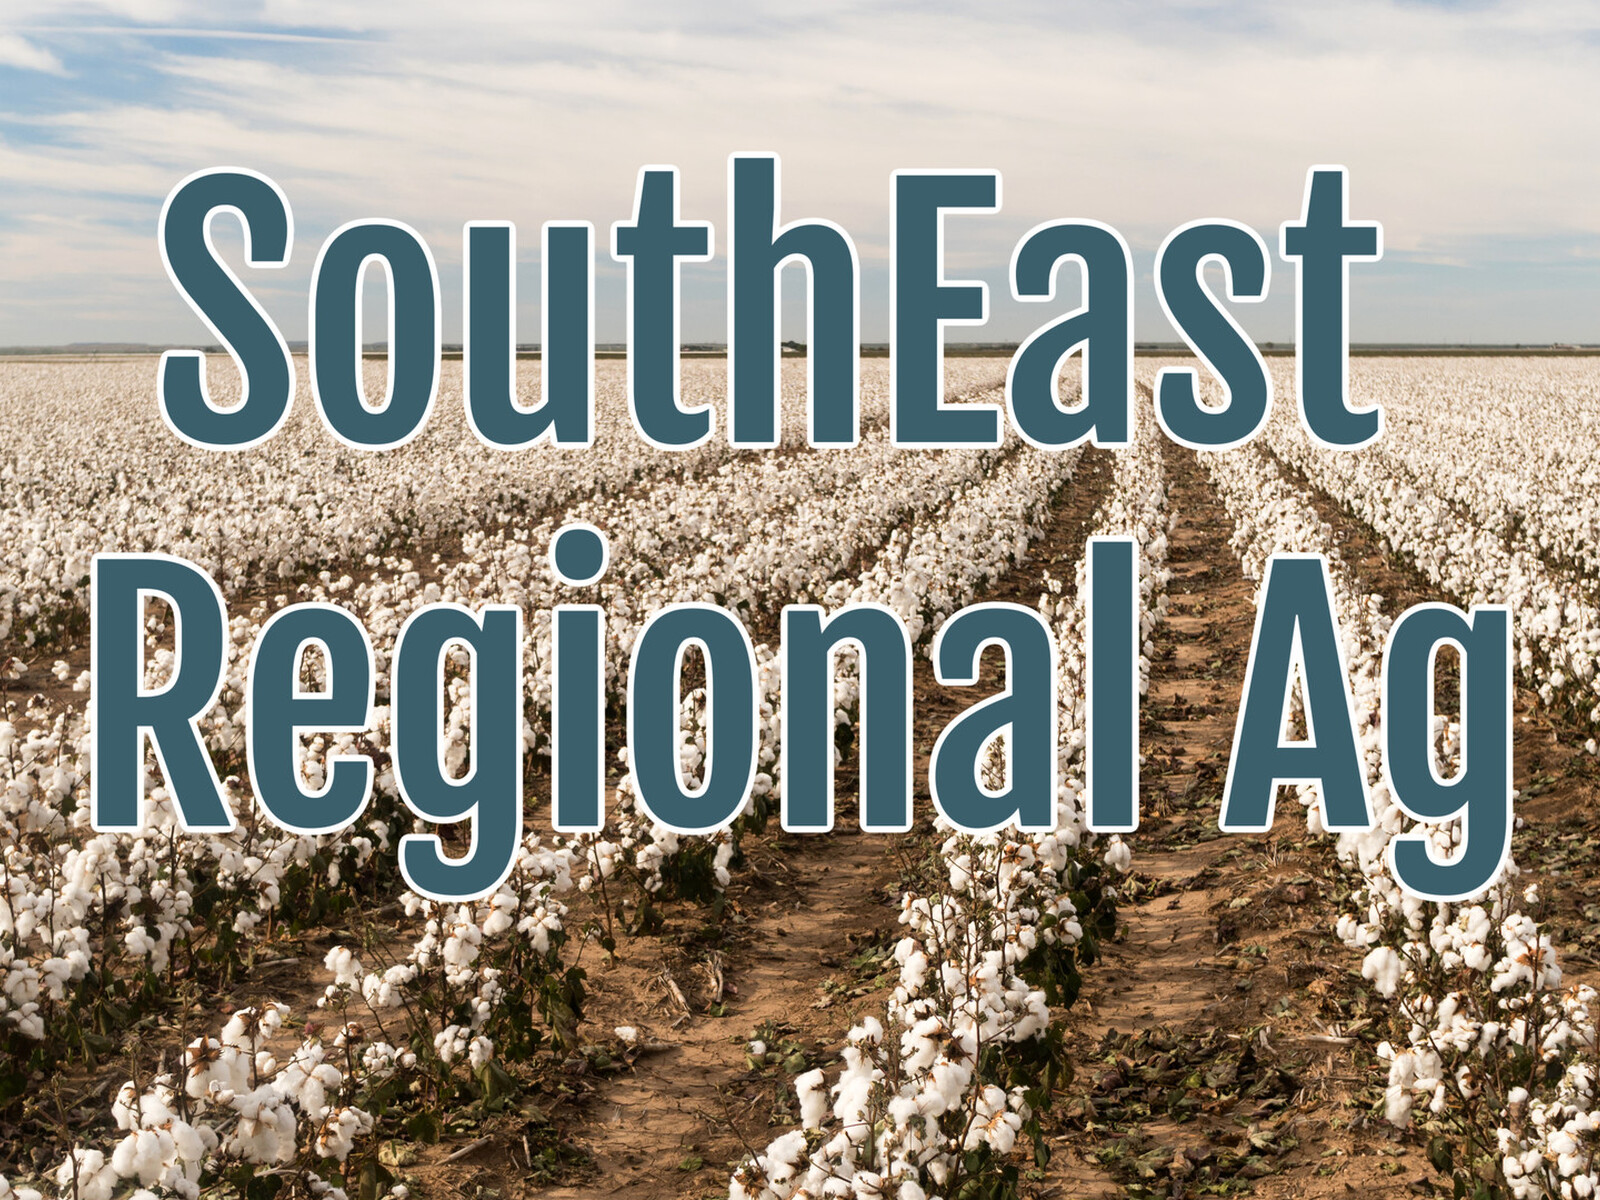 Developing Soil Health Benchmarks in the Cotton Belt